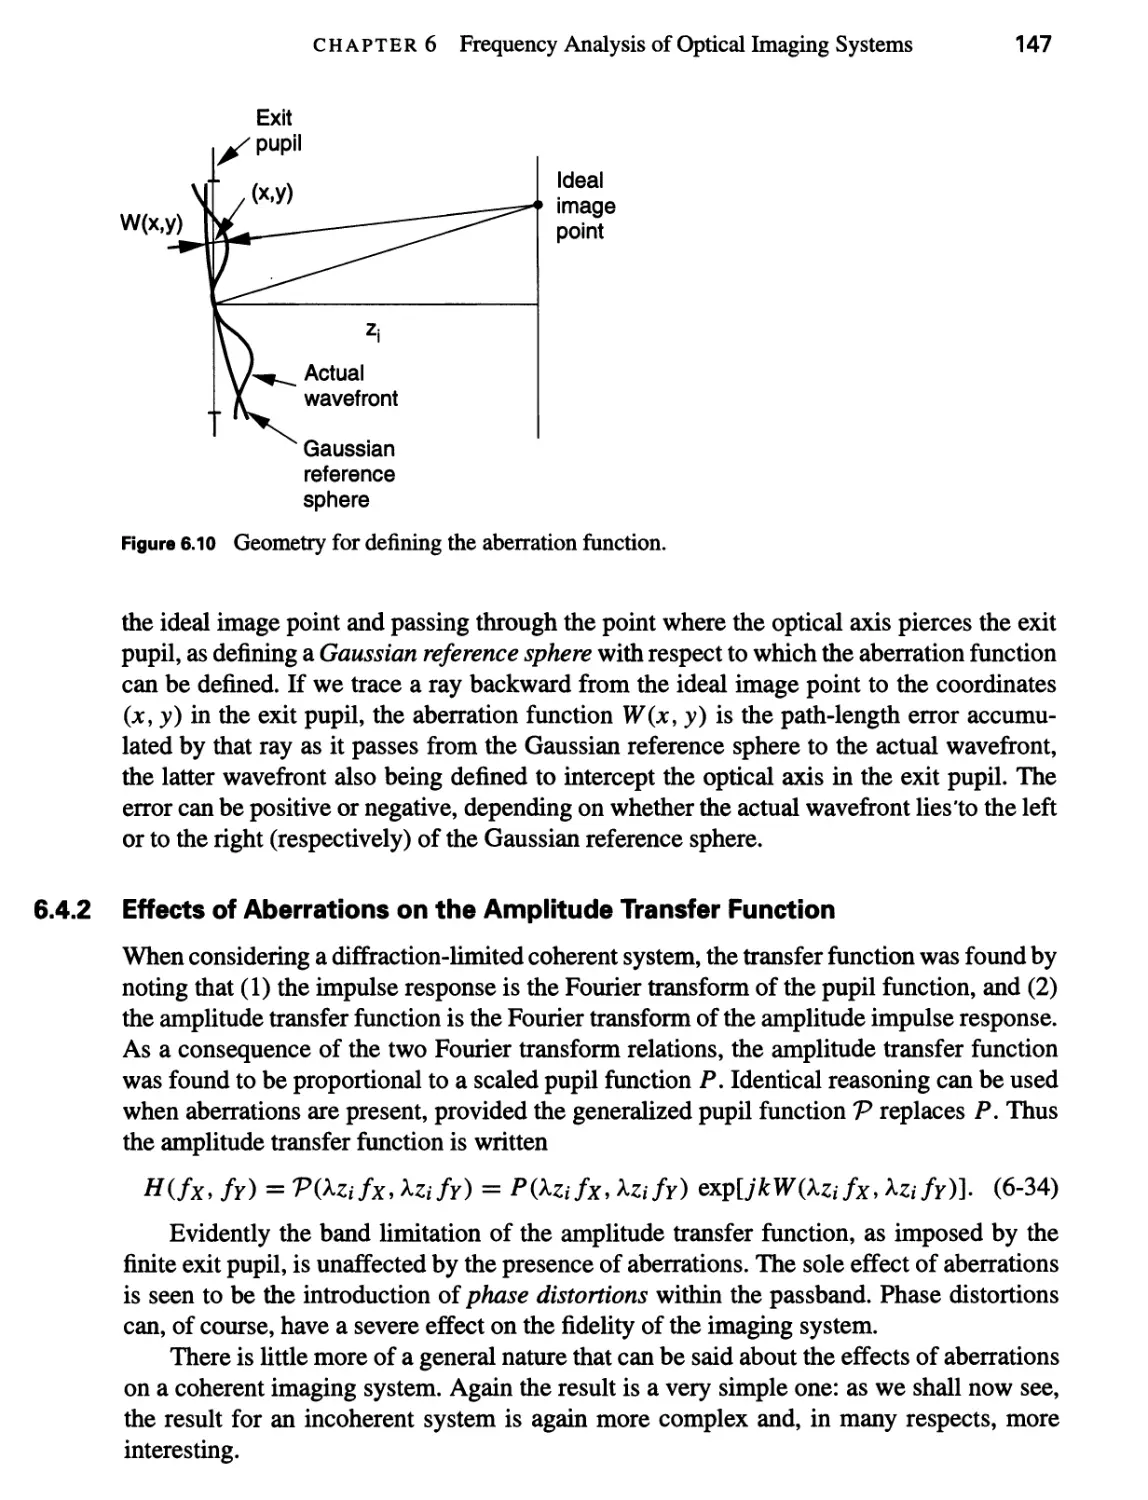 6.4.2 Effects of Aberrations on the Amplitude Transfer Function 147